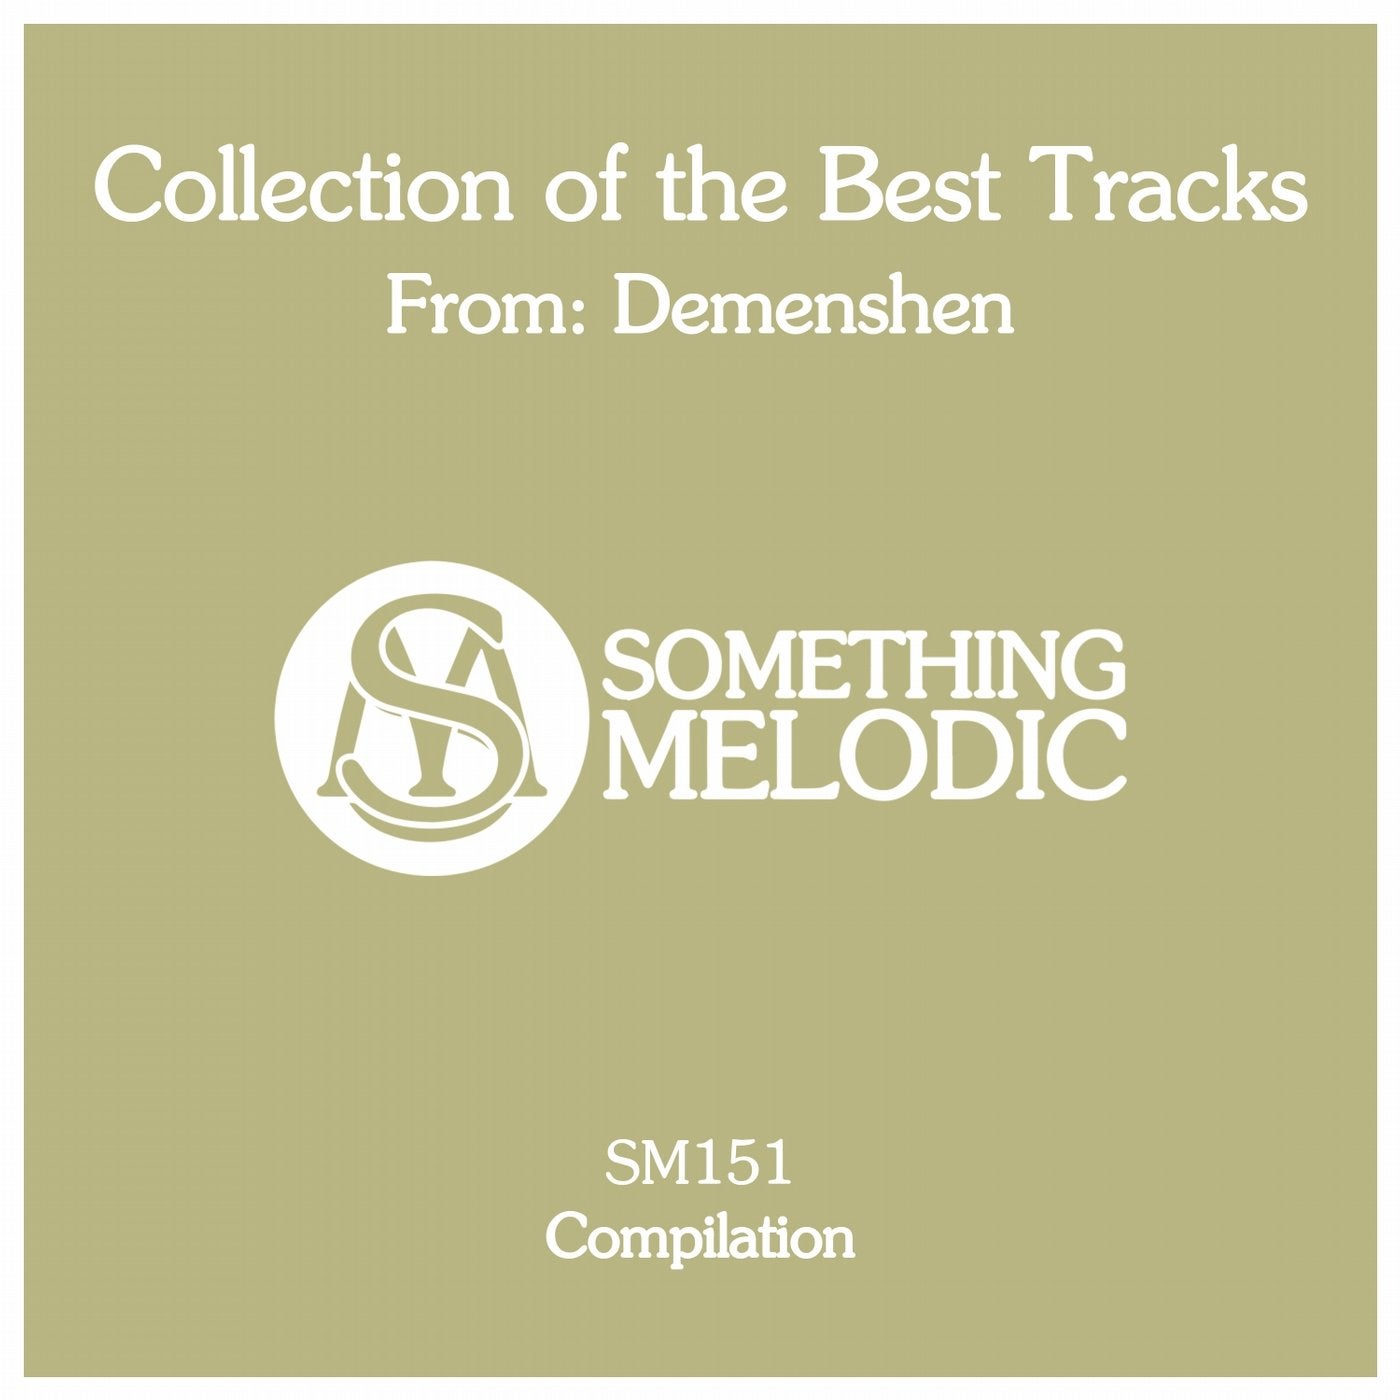 Collection of the Best Tracks From: Demenshen